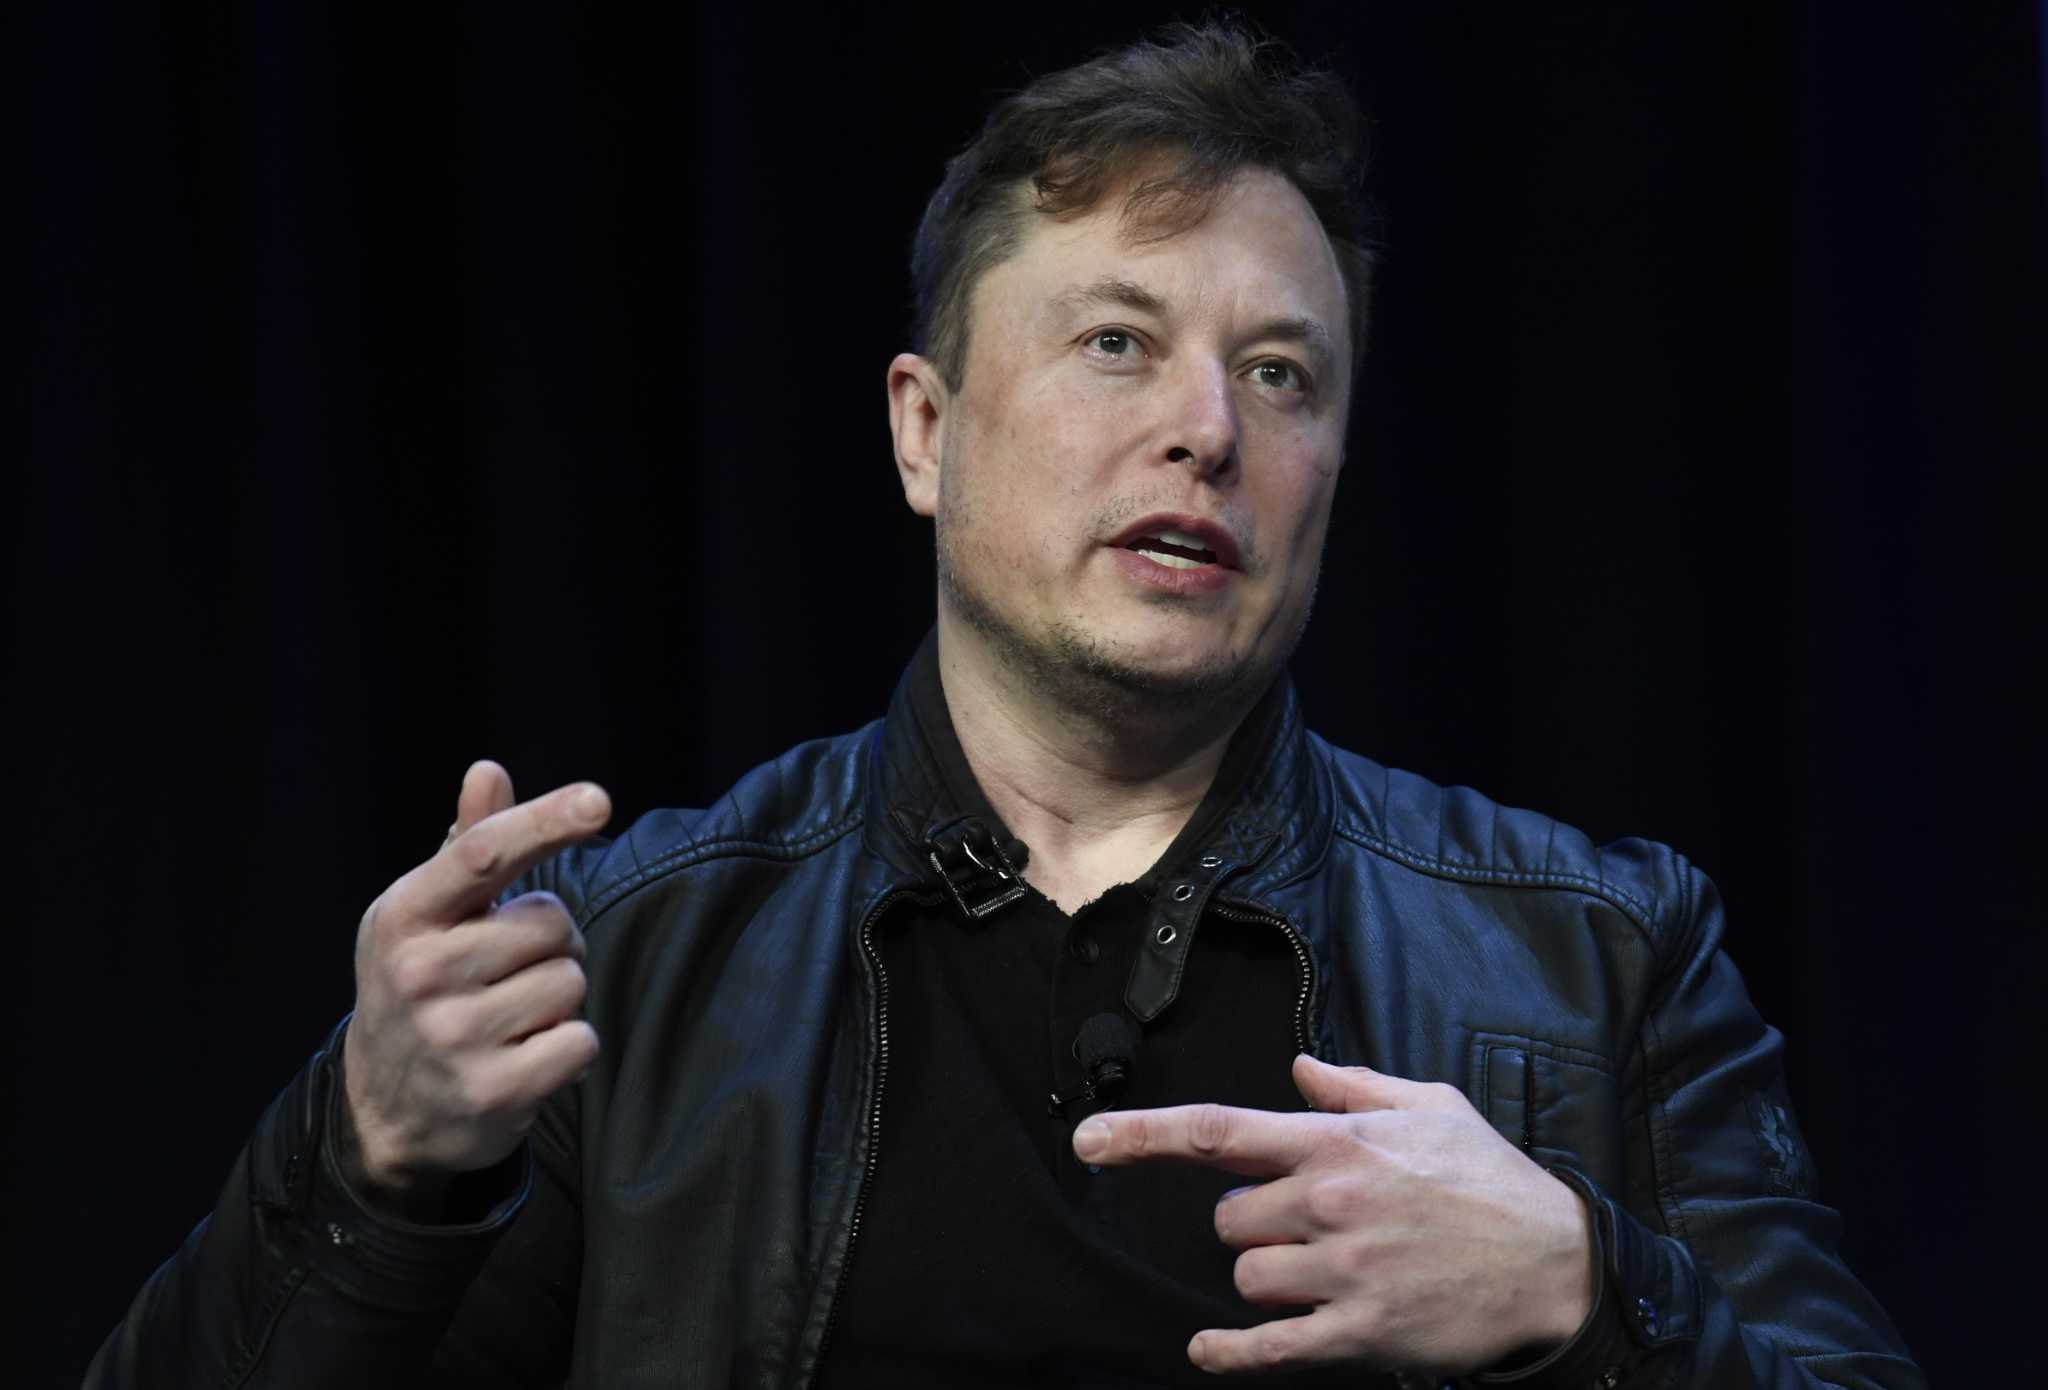 After 'giving serious thought to' a rival social media network, Elon Musk takes a 9% stake in Twitter